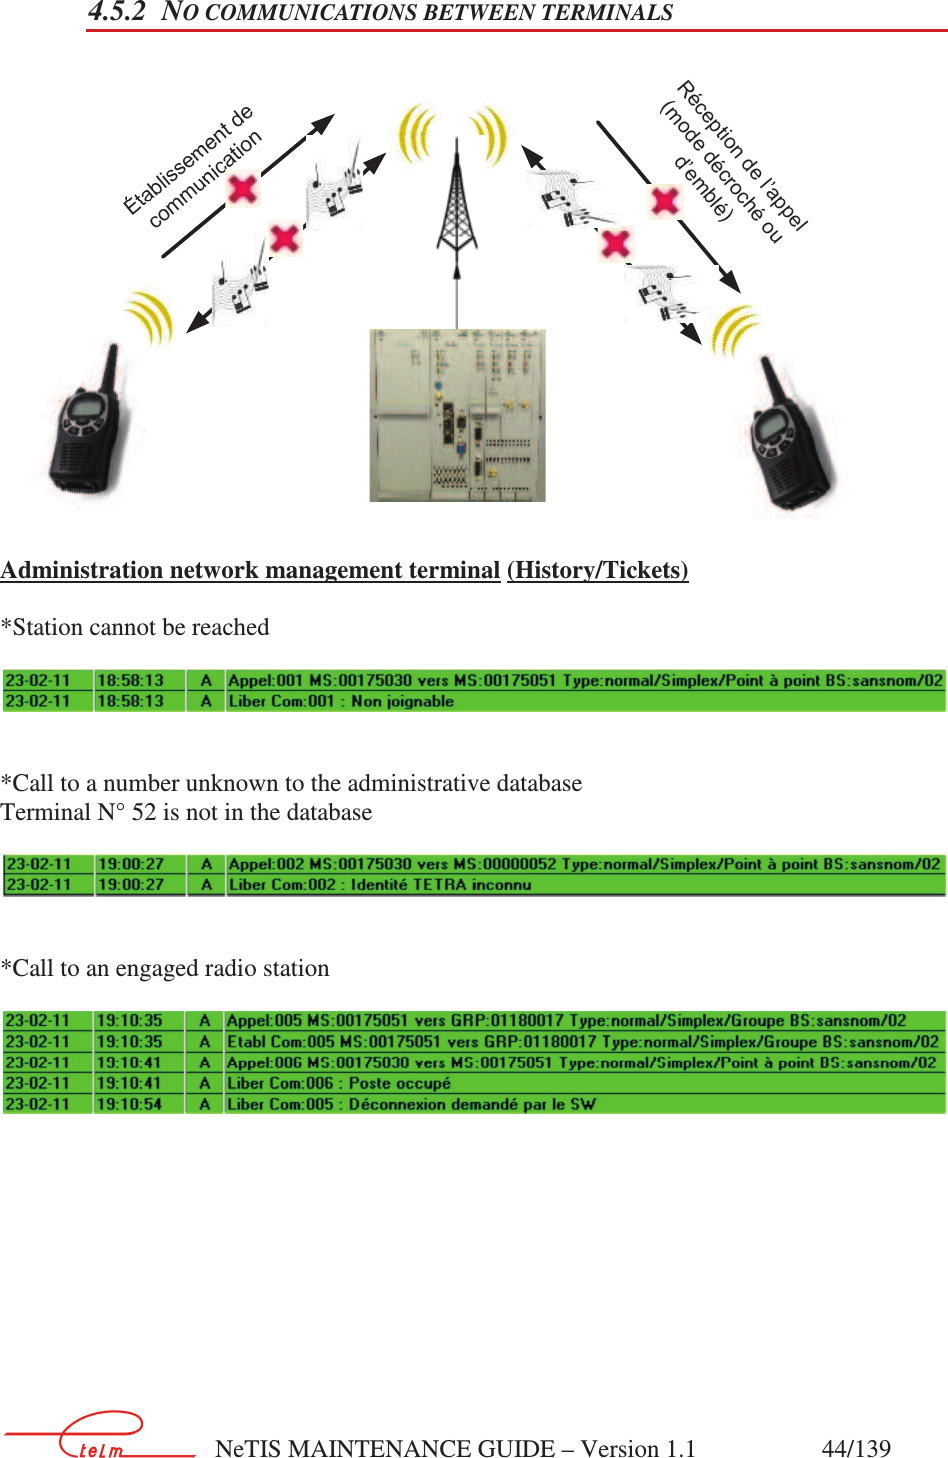        NeTIS MAINTENANCE GUIDE – Version 1.1                    44/139   4.5.2 NO COMMUNICATIONS BETWEEN TERMINALS  Administration network management terminal (History/Tickets)  *Station cannot be reached     *Call to a number unknown to the administrative database Terminal N° 52 is not in the database     *Call to an engaged radio station      